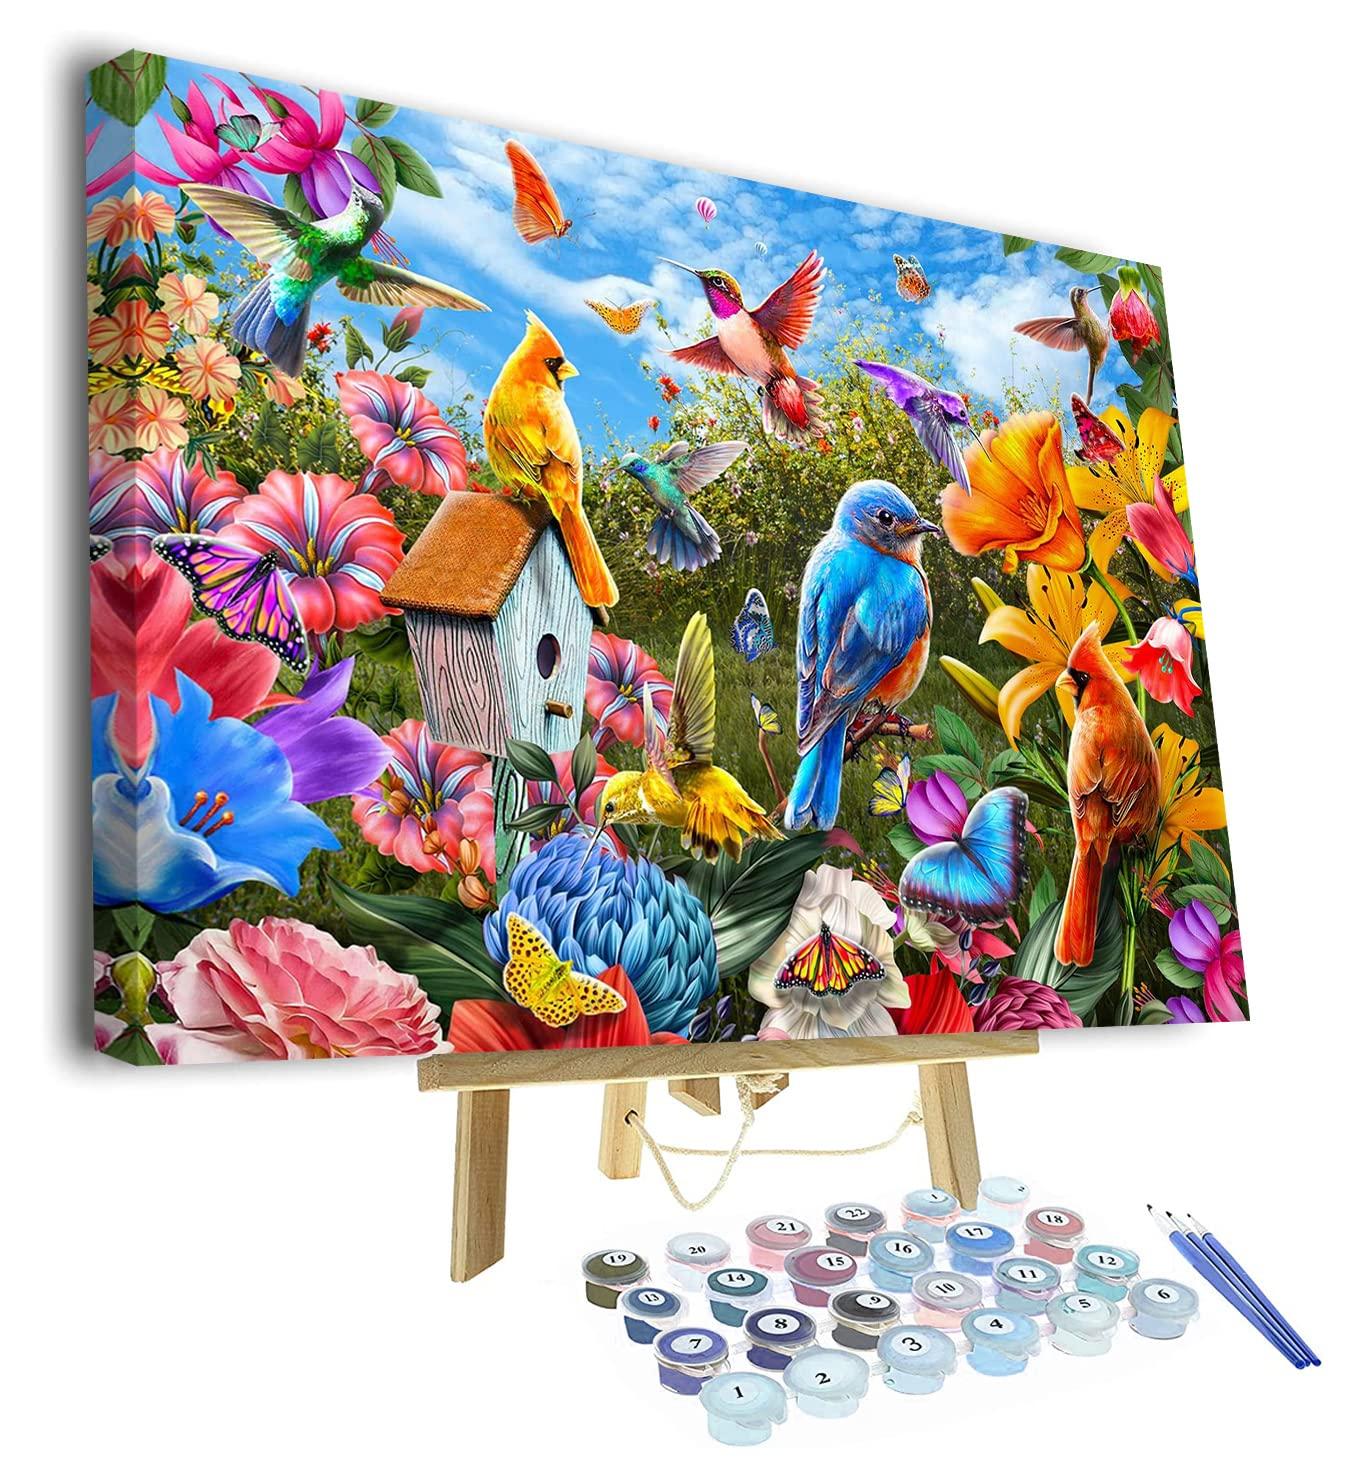 Paint by Numbers for Adults, DIY Birds Adult Paint by Numbers Kits, Butterfly and Flower Paint by Numbers with Brushes and Acrylic Pigment, 16X20 Inch Painting by Numbers Crafts for Adults Framed